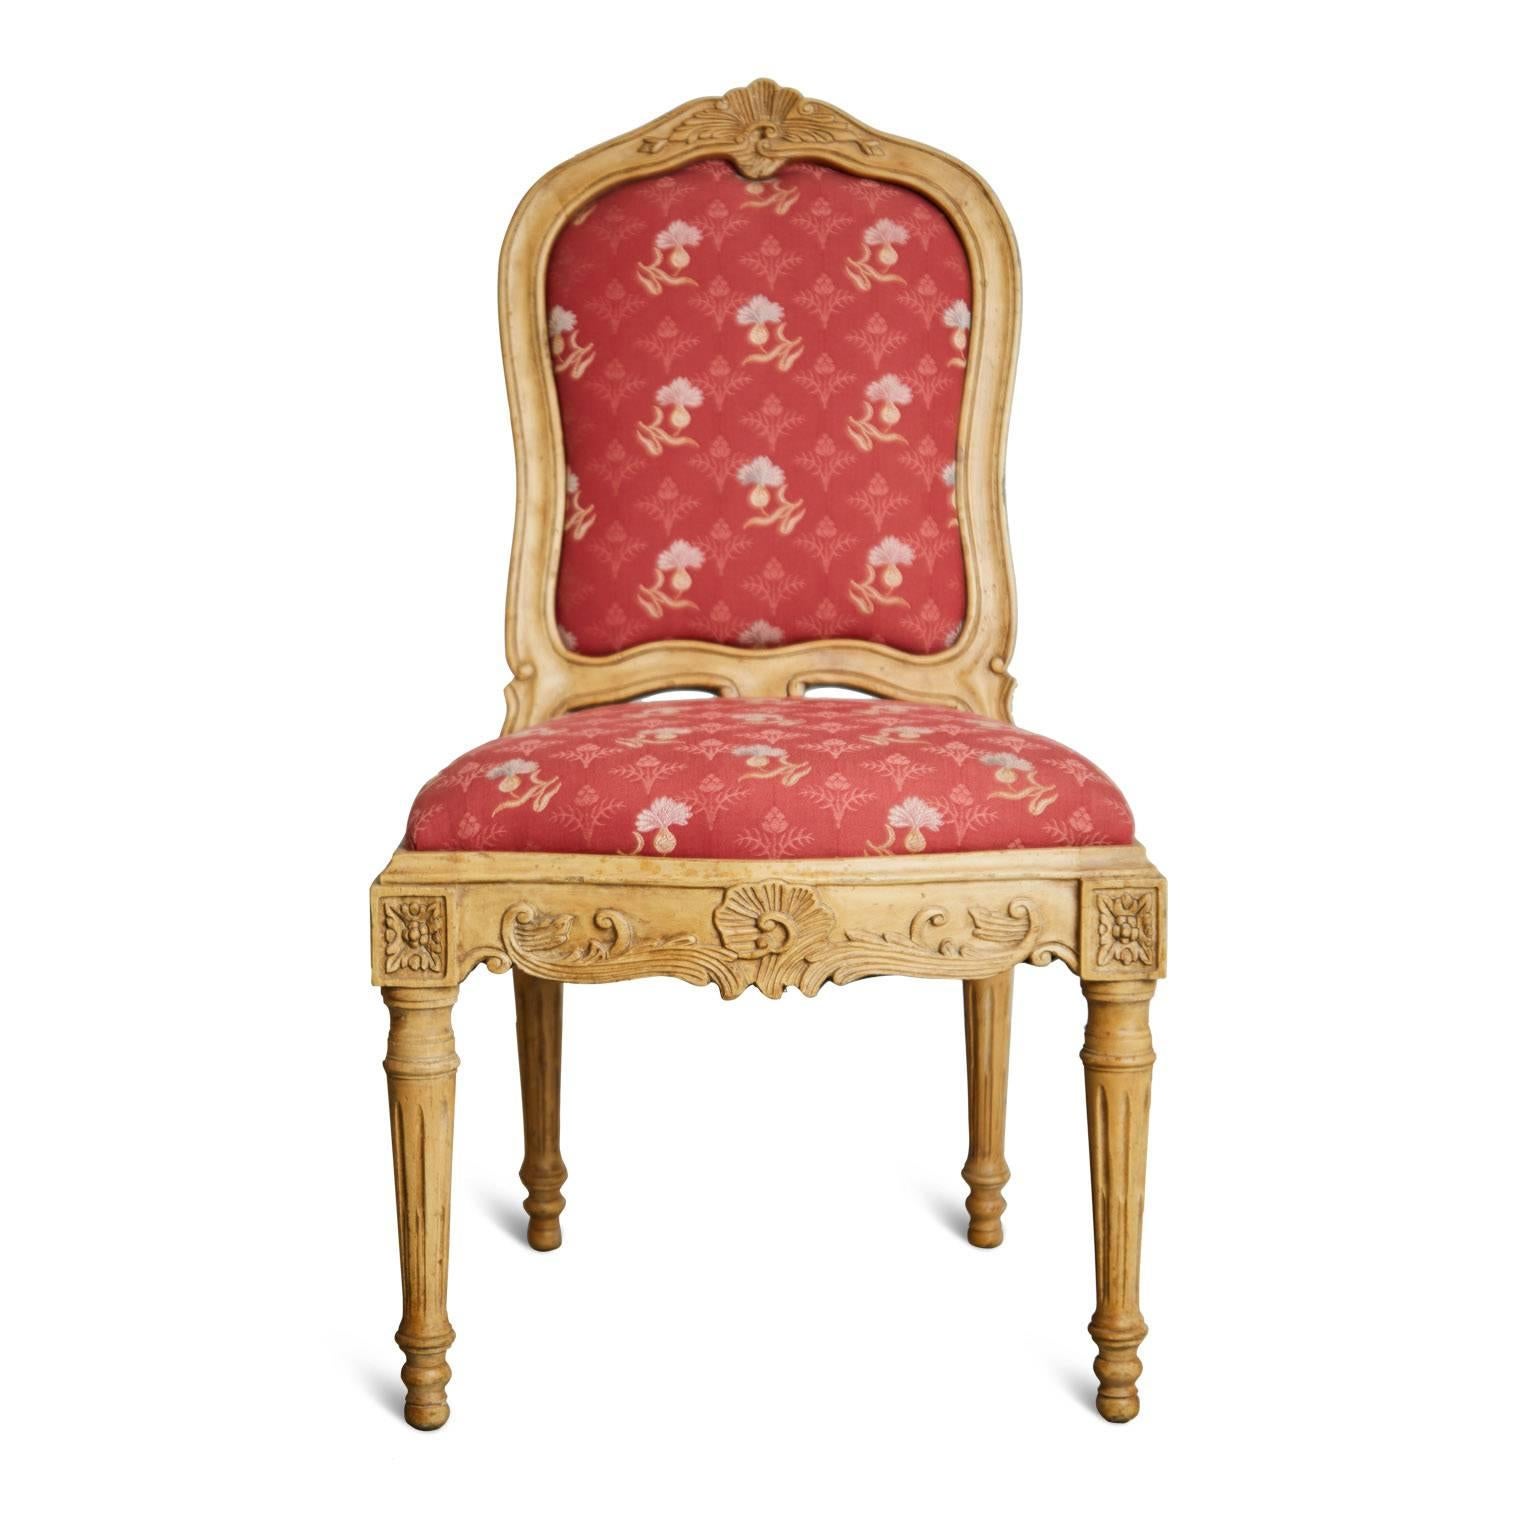 Set of six (6) Renaissance Revival side or dining chairs in the style of Louis XIV. This ornate group would inject some French sophistication in to any interior as well as providing a comfortable seat. These elegant chairs possess graceful usage of